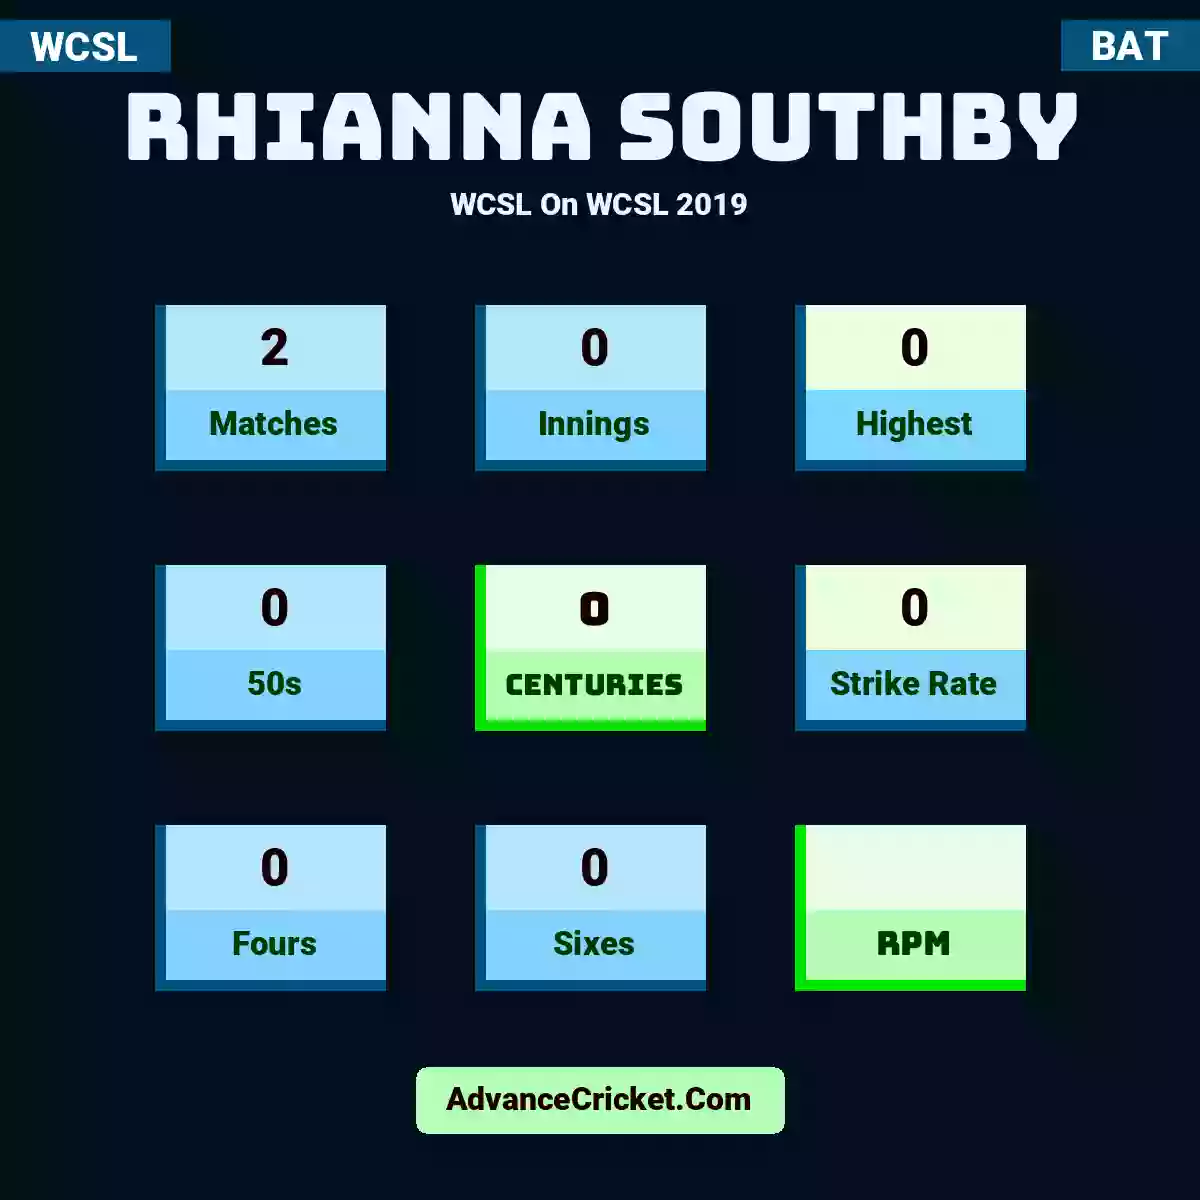 Rhianna Southby WCSL  On WCSL 2019, Rhianna Southby played 2 matches, scored 0 runs as highest, 0 half-centuries, and 0 centuries, with a strike rate of 0. R.Southby hit 0 fours and 0 sixes.